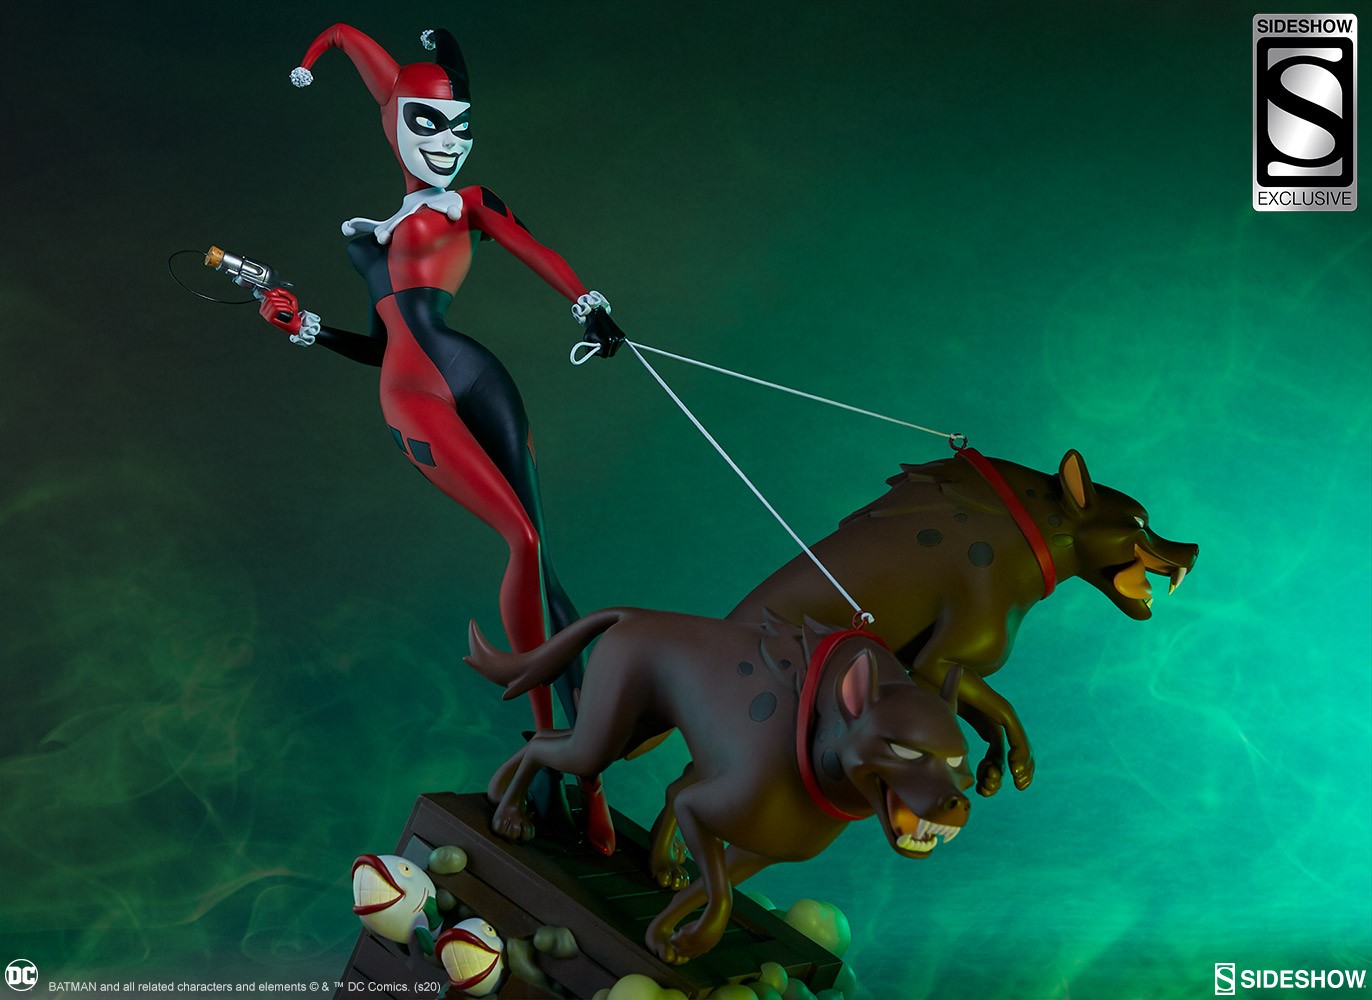 Harley Quinn Exclusive Edition View 3